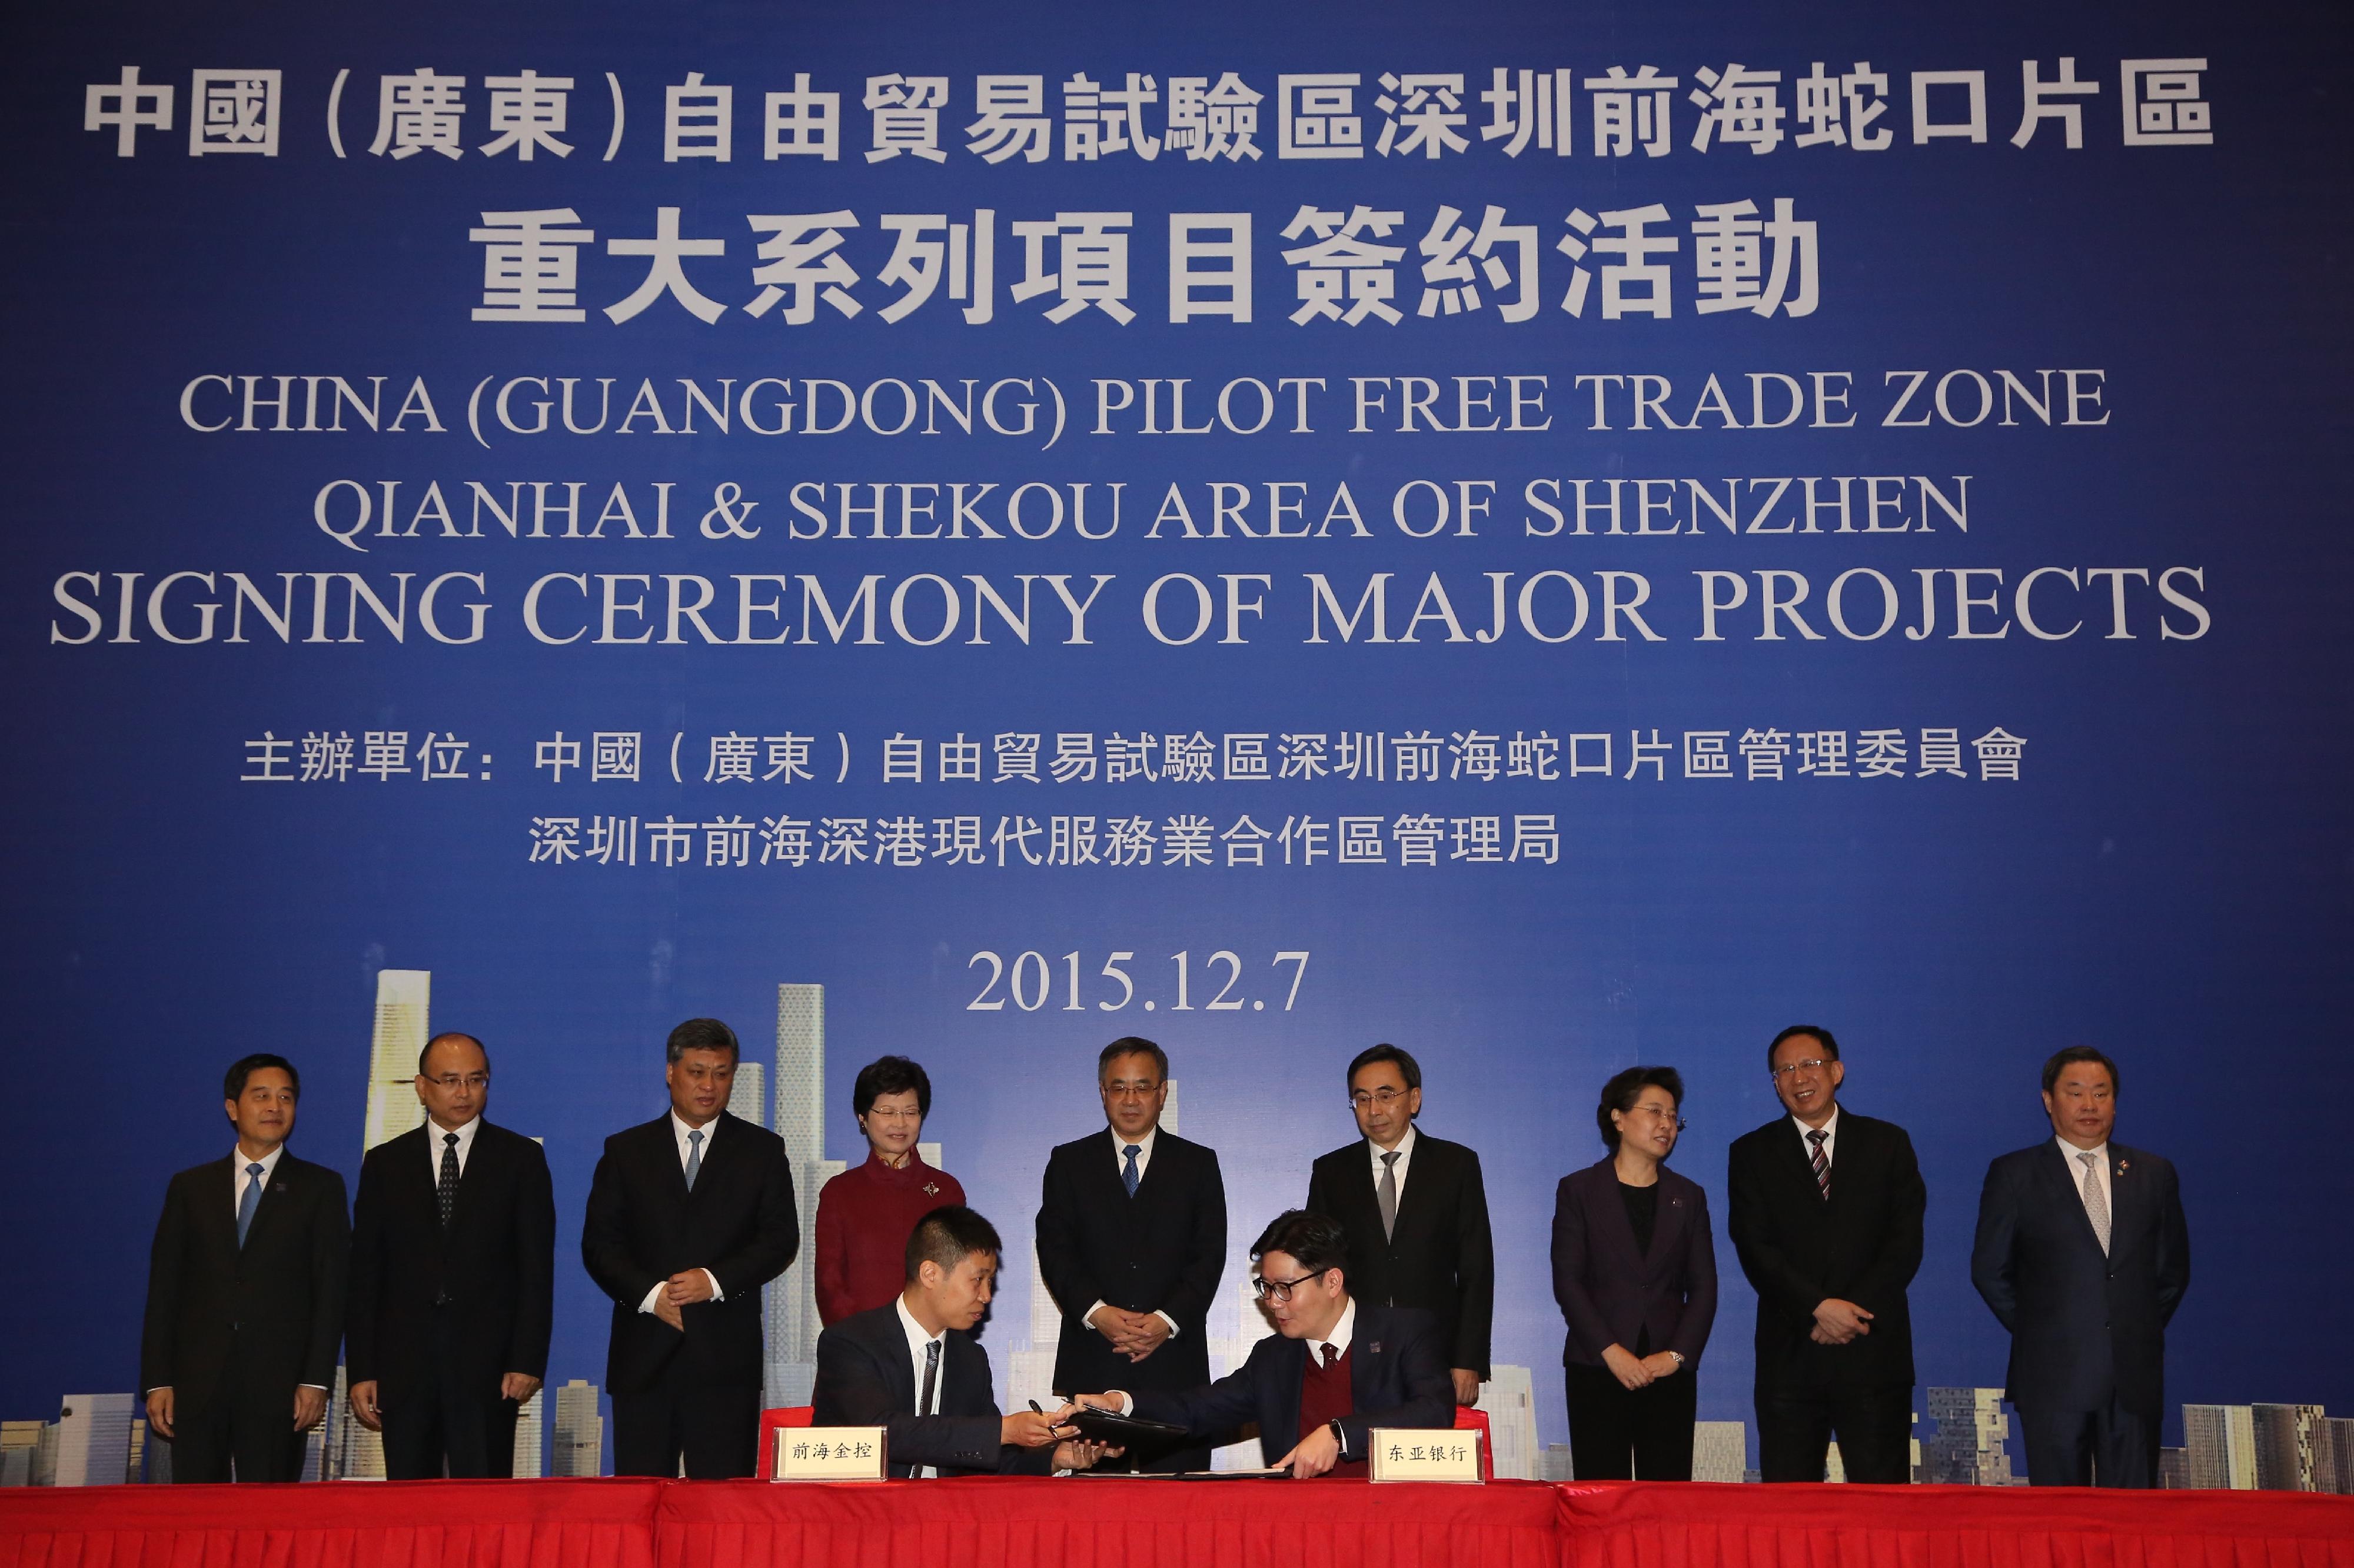 The then Chief Secretary for Administration, Mrs Carrie Lam (back row, fourth left), witnessed the agreement signing ceremony of major projects of the China (Guangdong) Pilot Free Trade Zone Qianhai and Shekou Area of Shenzhen in Qianhai, Shenzhen, on December 7, 2015.